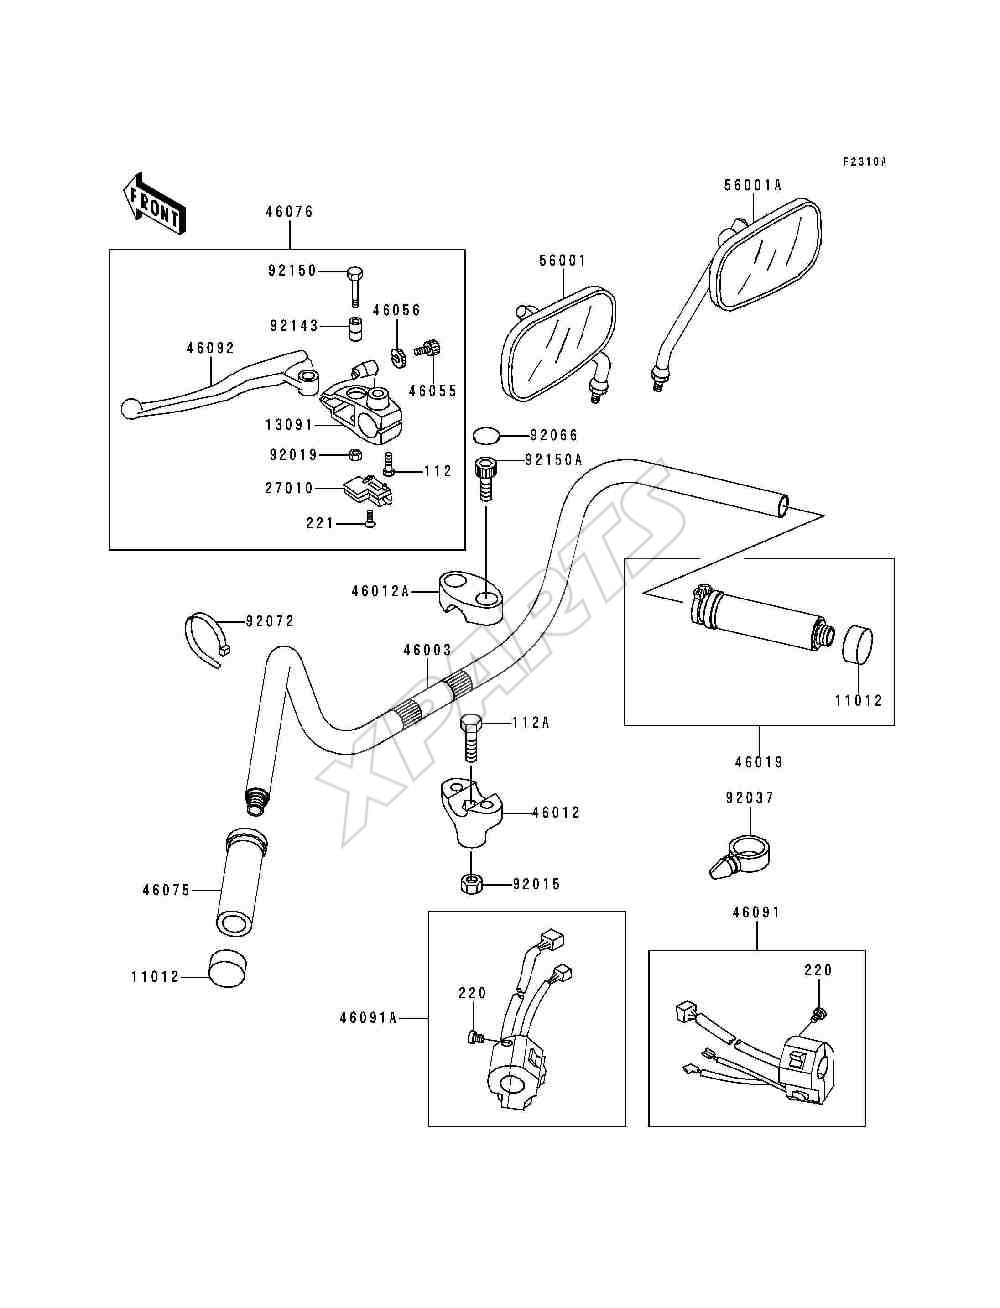 Picture for category Handlebar(VN800-A3 / A4 / A5)